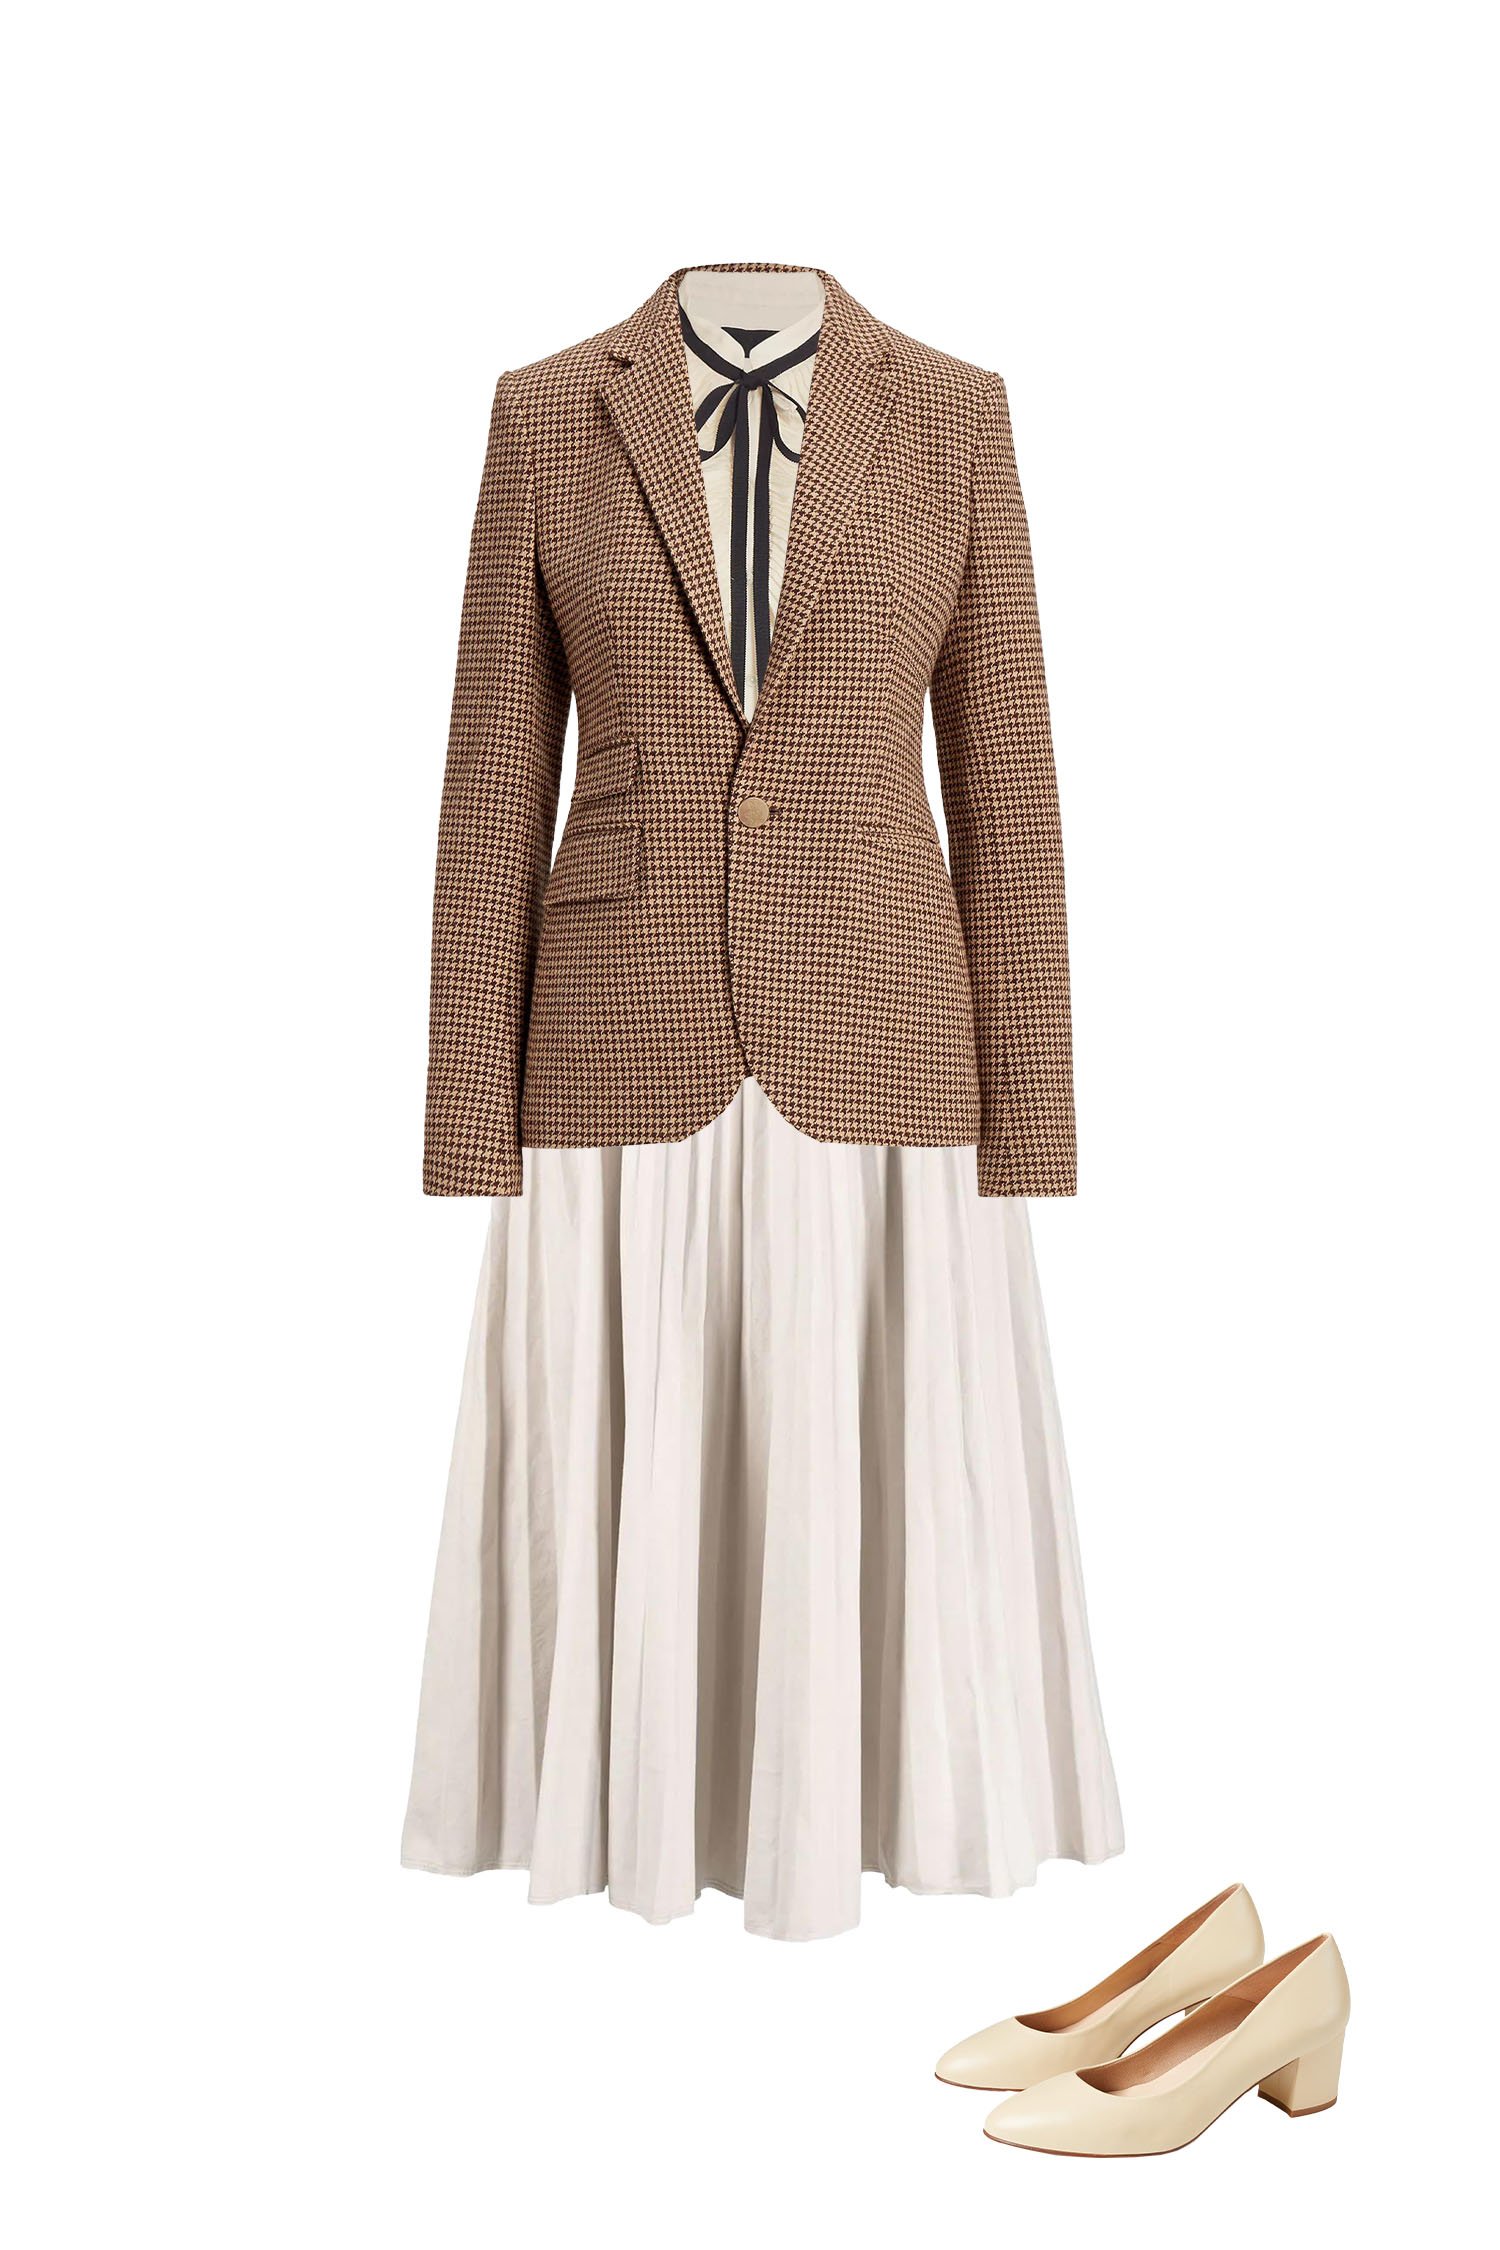 Business Casual Midi-Skirt Outfit - Beige Pleated Midi Skirt, Cream Ruffle and Black Bow Blouse, Camel Houndstooth Blazer, Cream Block Heel Pumps